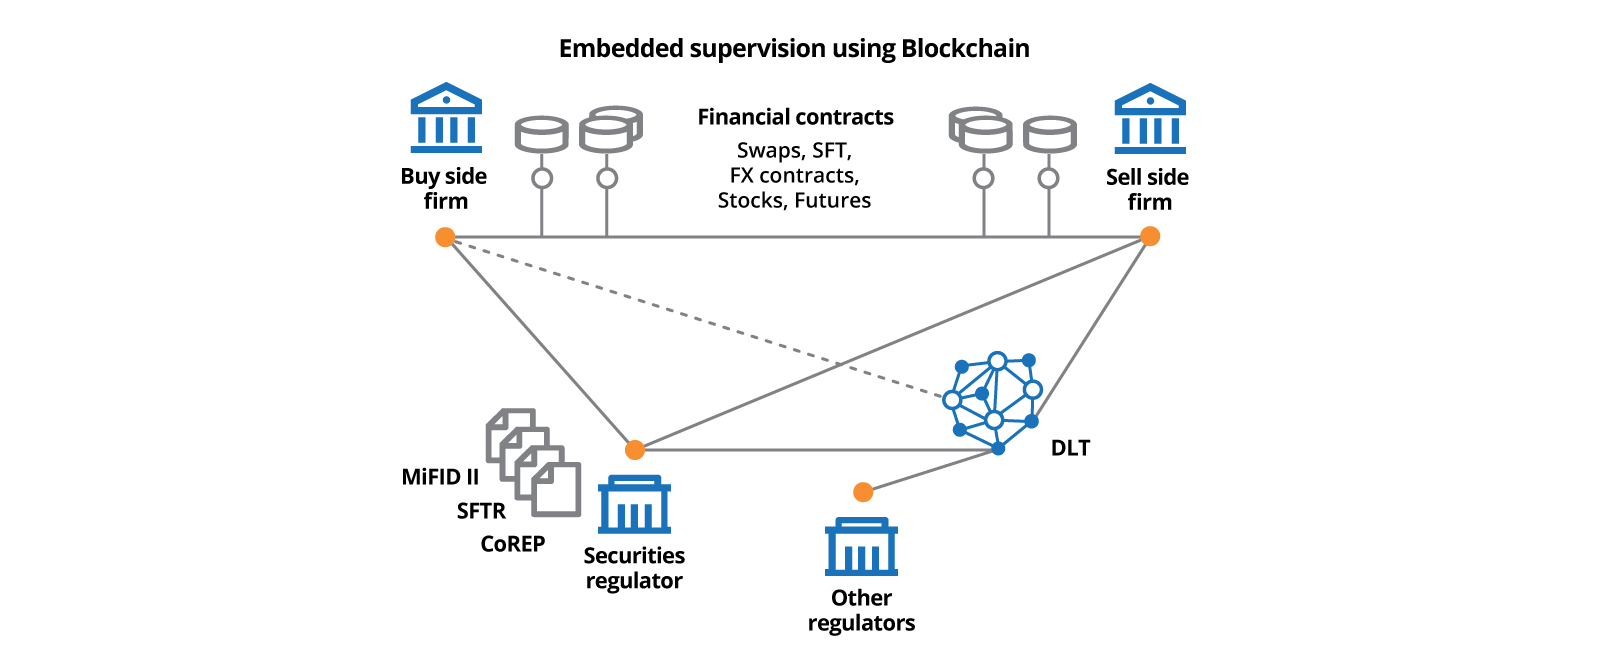 Embedded supervision using blockchain